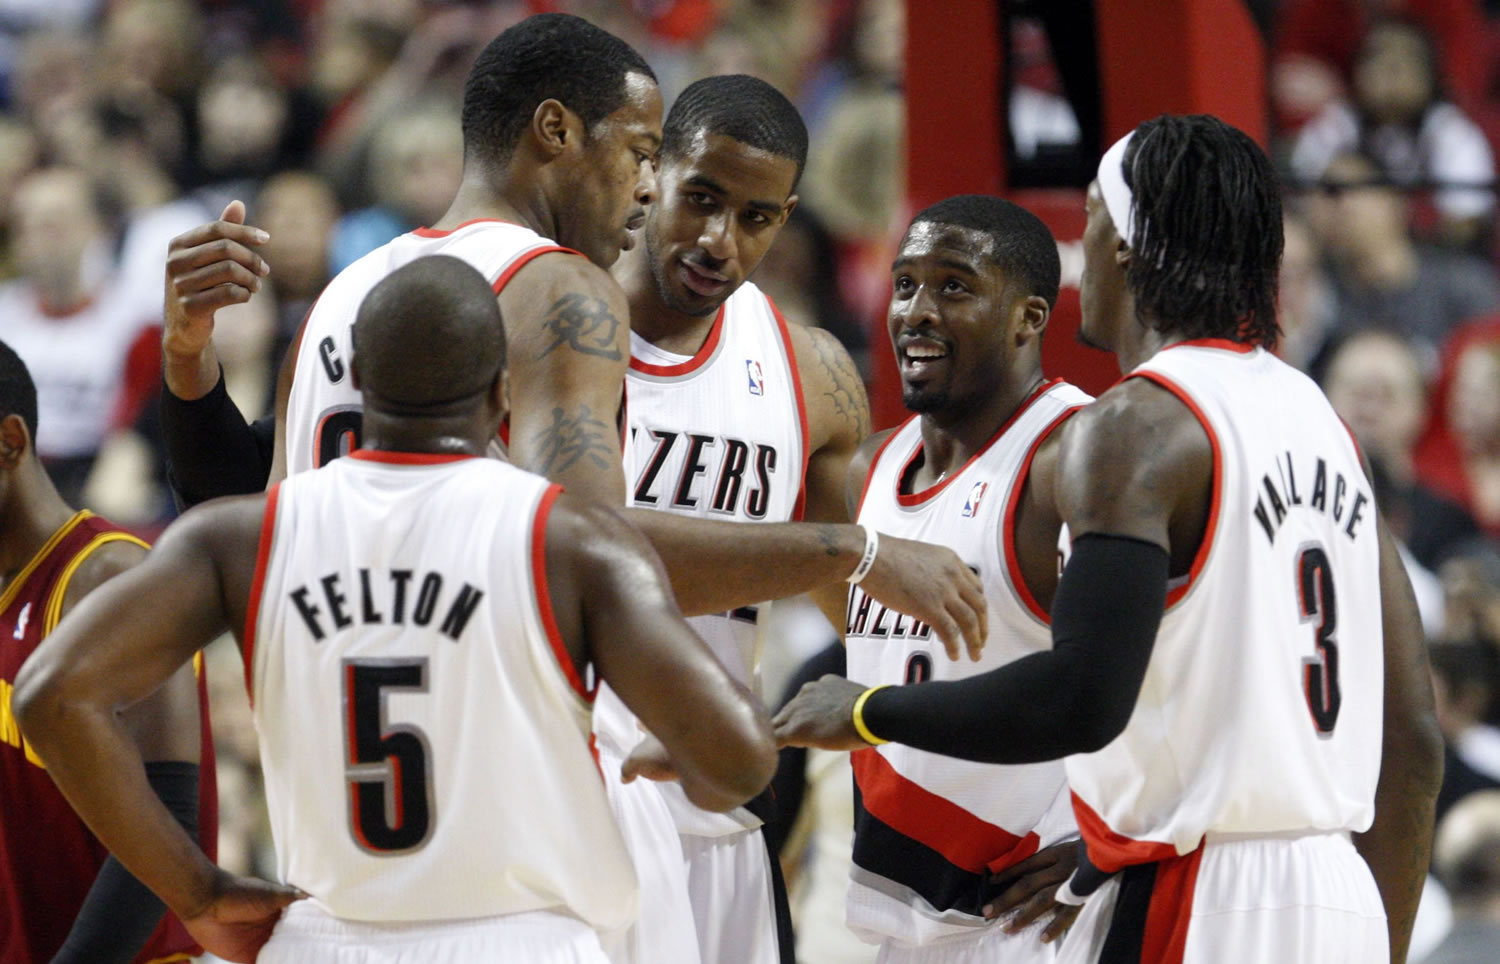 Raymond Felton (5), along with Trail Blazers teammates (from left) Marcus Camby, LaMarcus Aldridge, Wesley Matthews and Gerald Wallace know they have something special in Portland.